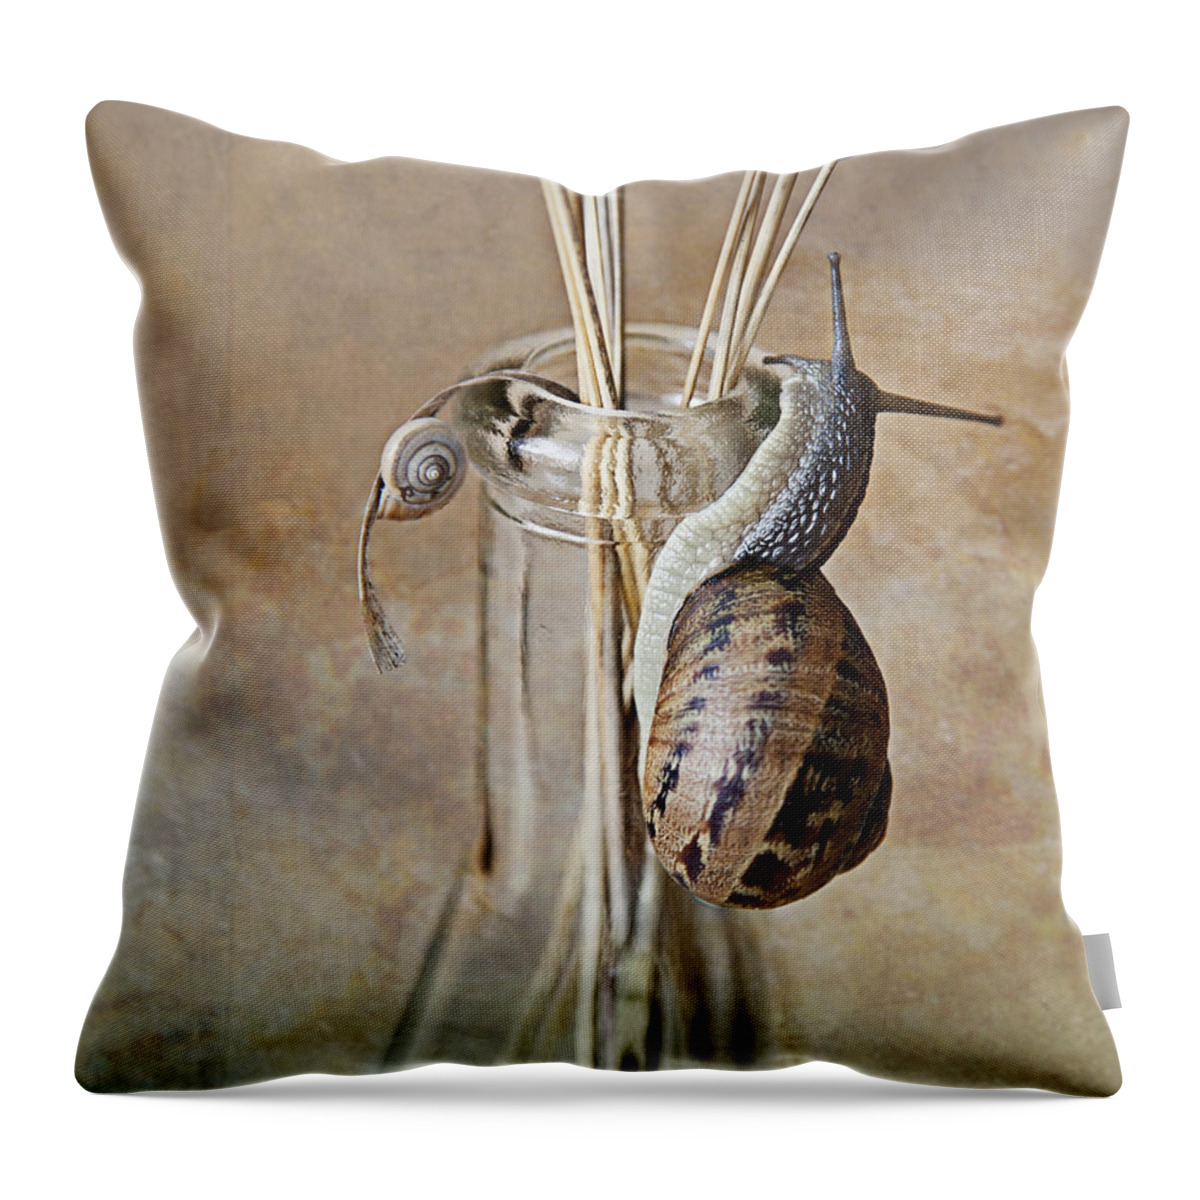 Snail Throw Pillow featuring the photograph Snails by Nailia Schwarz